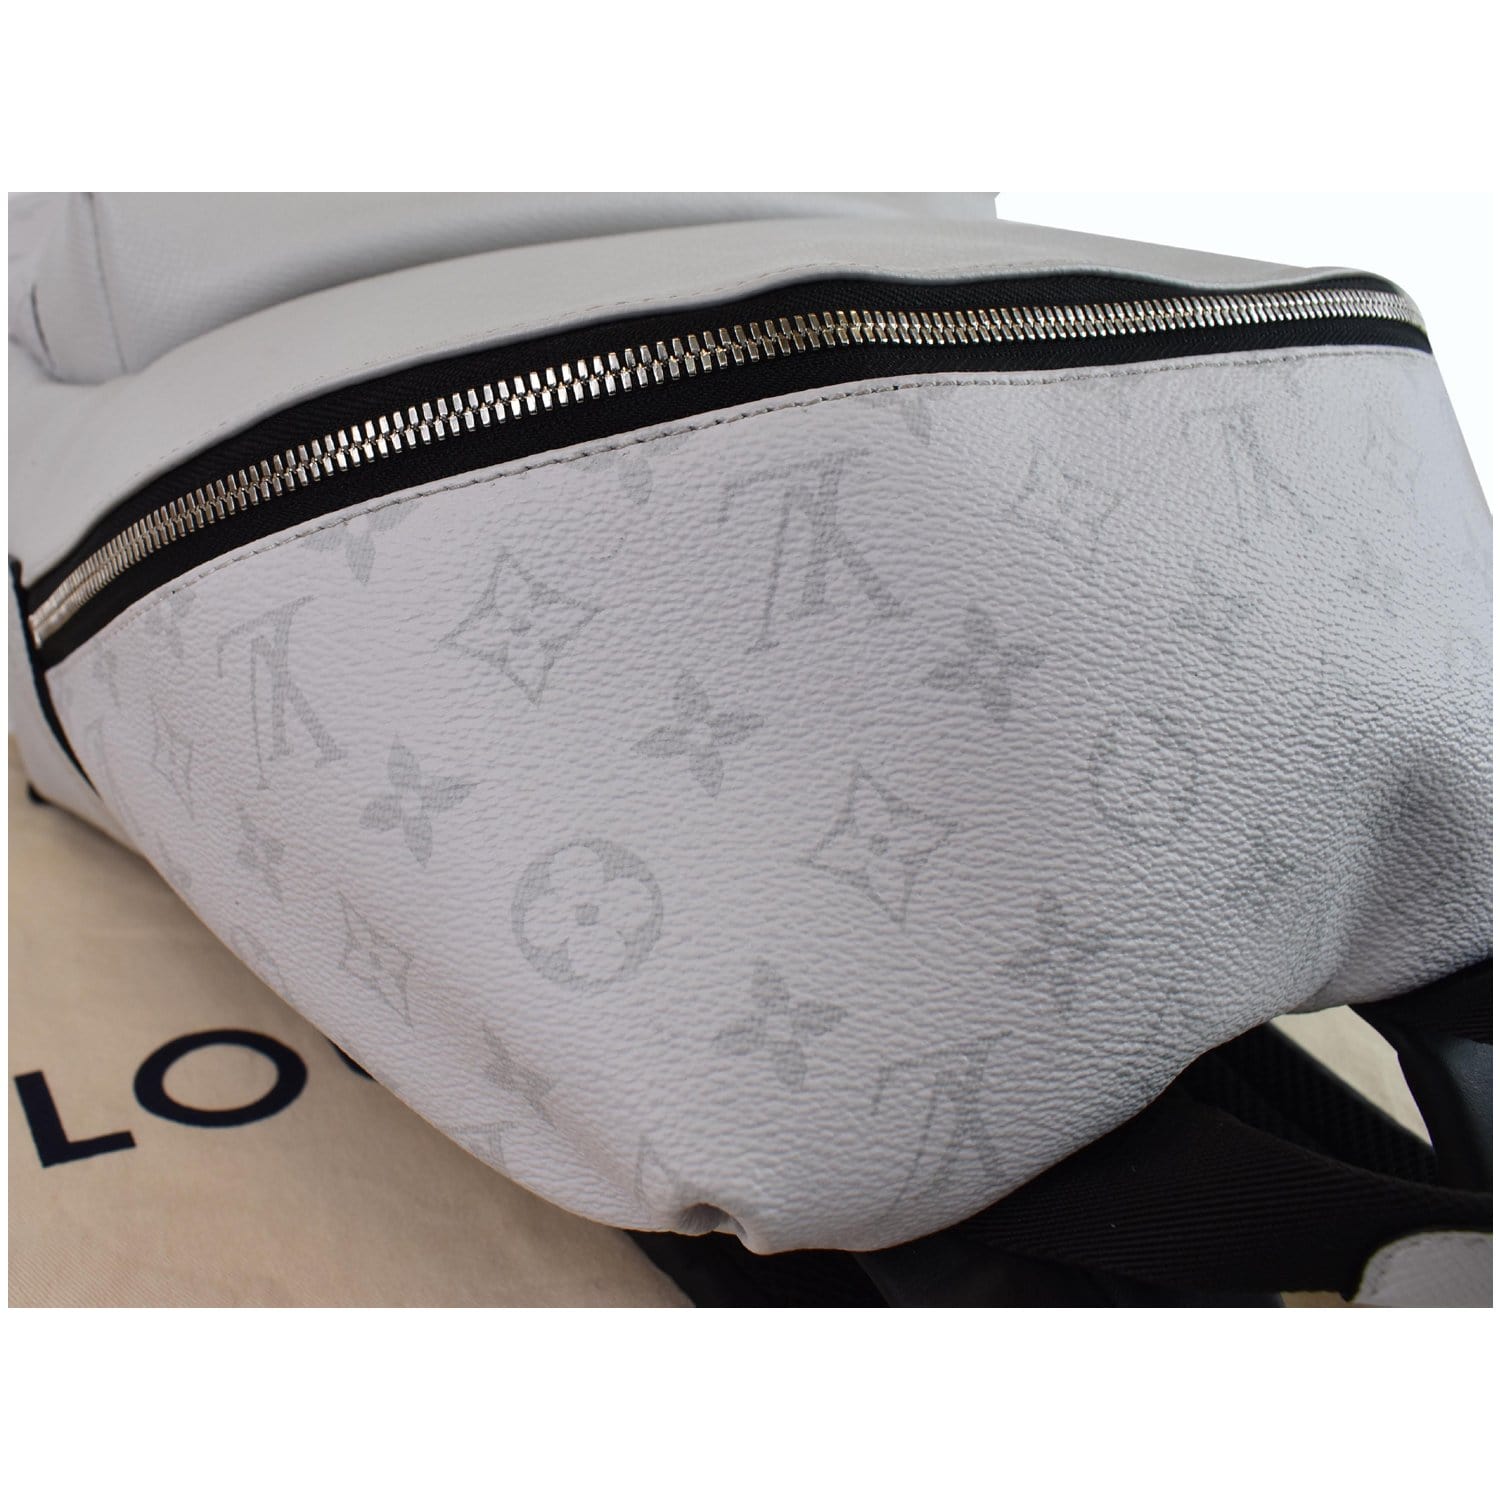 Louis Vuitton Discovery Backpack PM Monogram | MTYCI